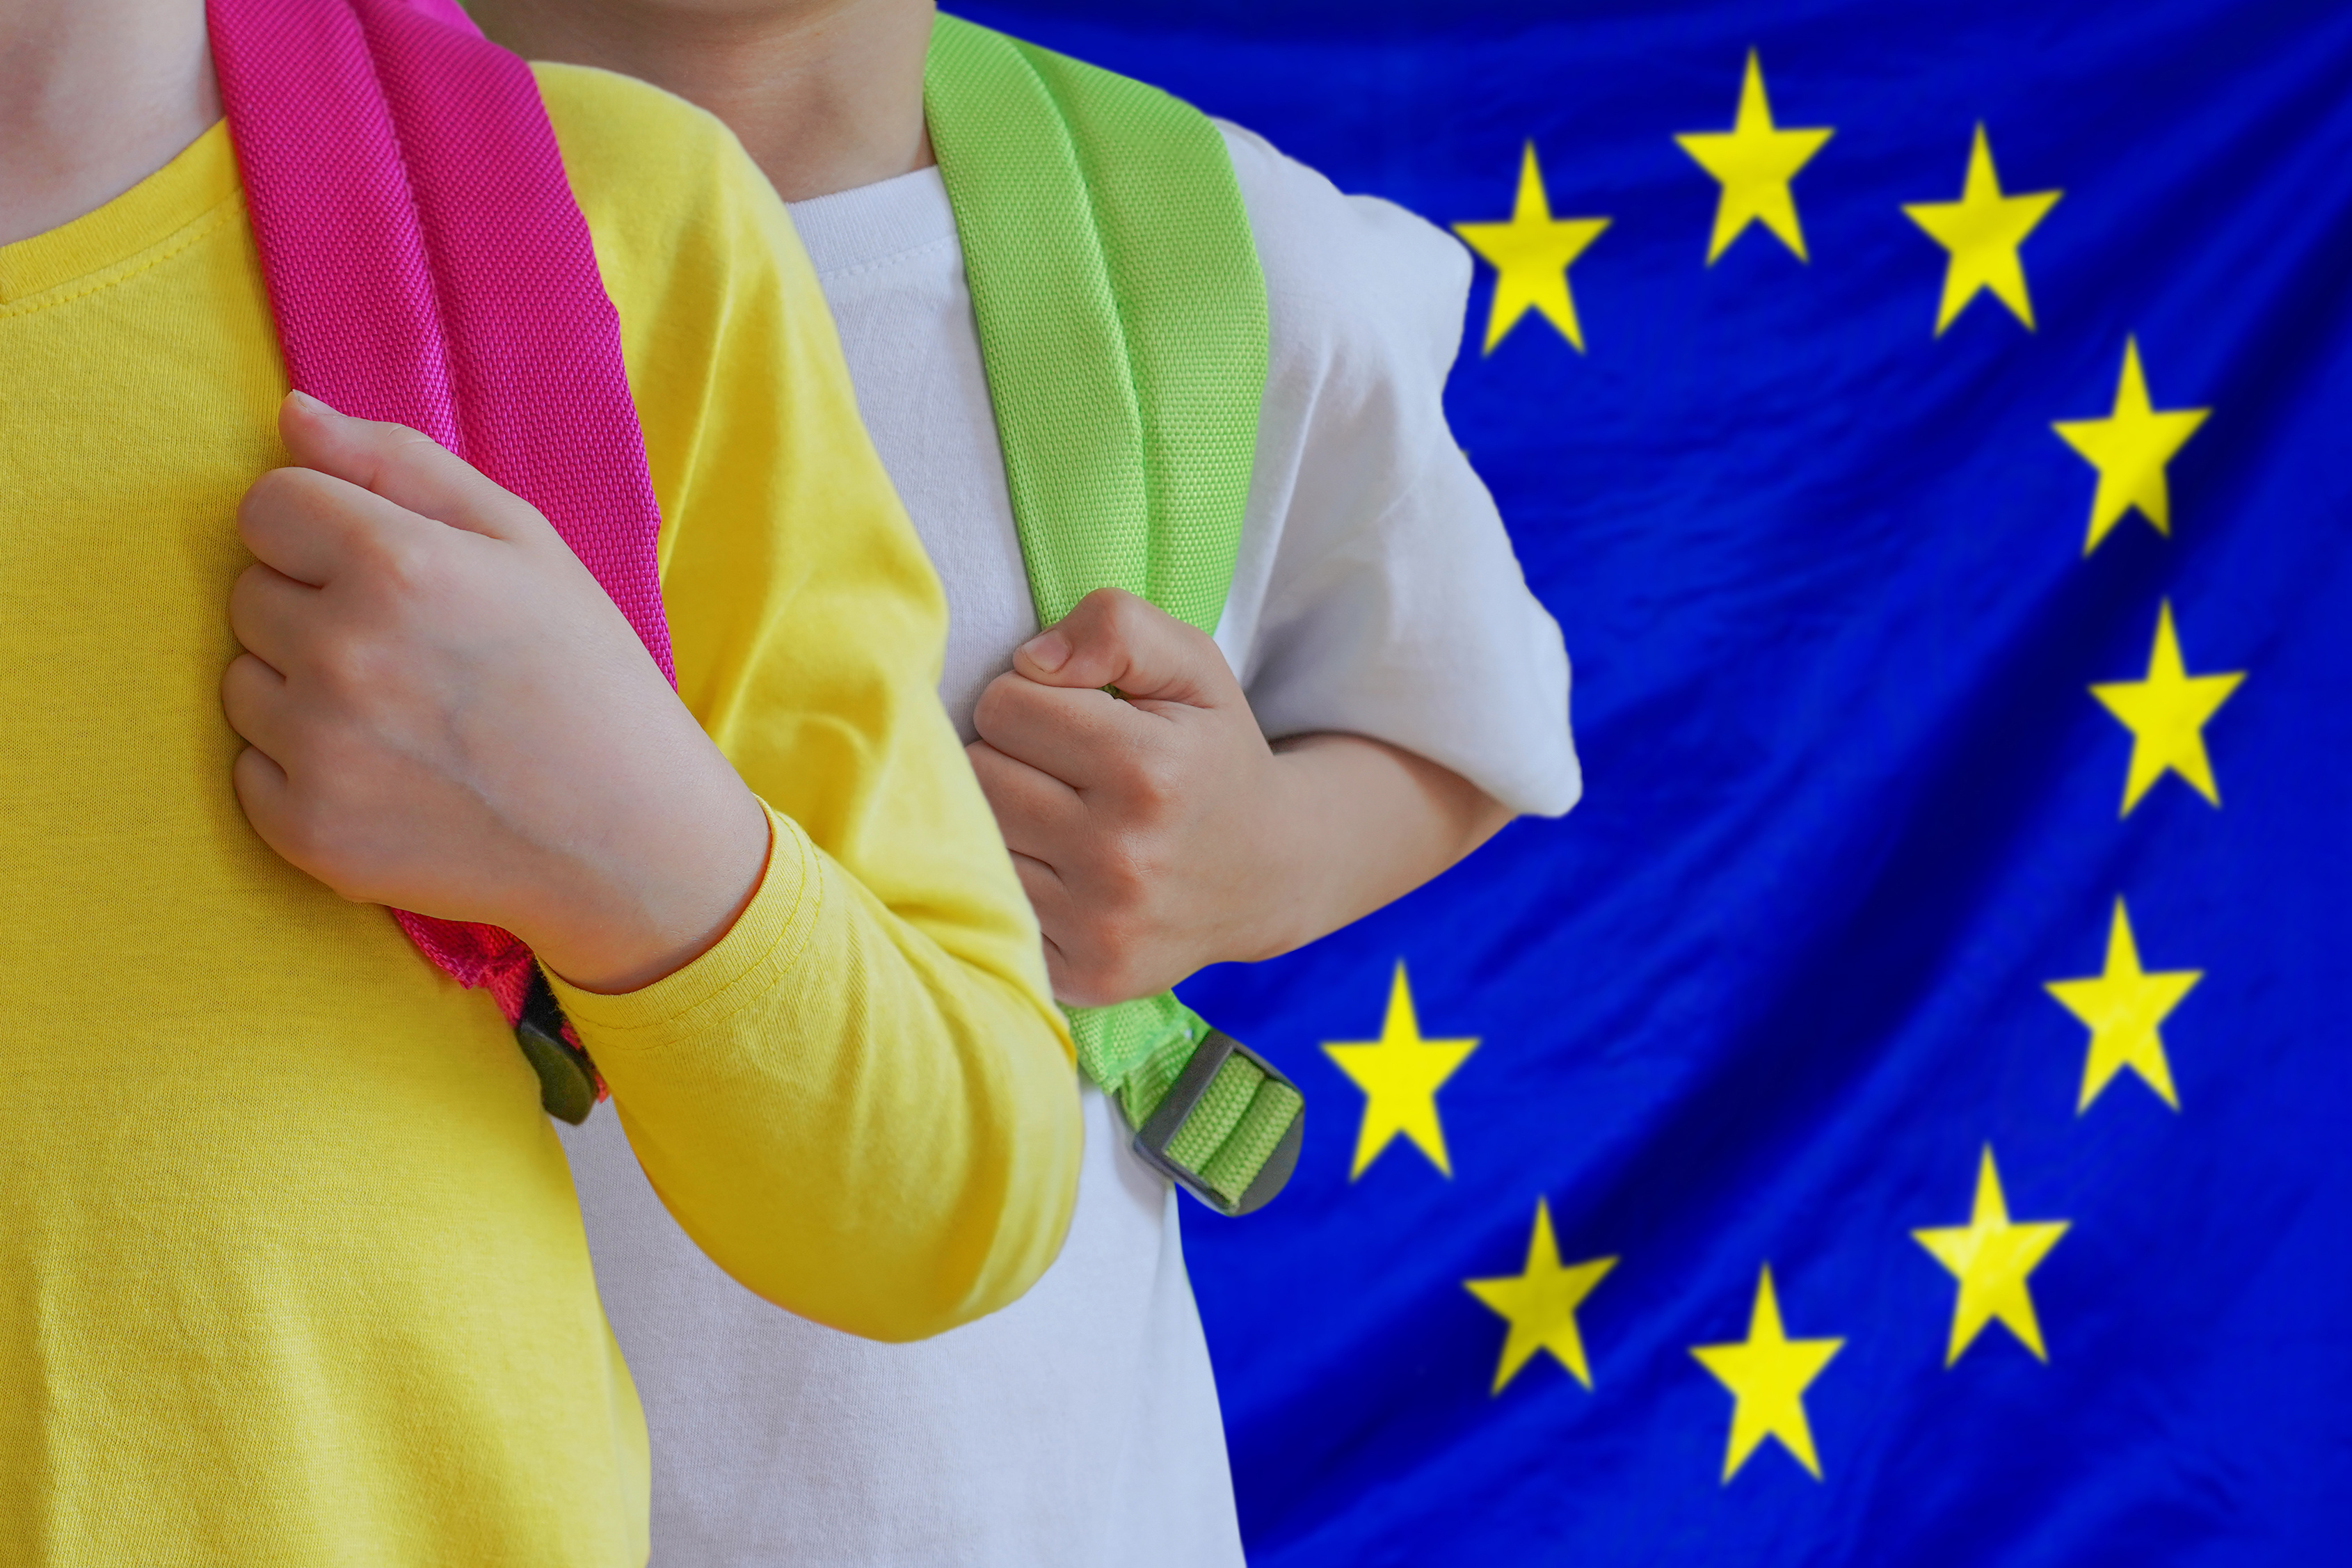 Two kids with satchels background of EU flag